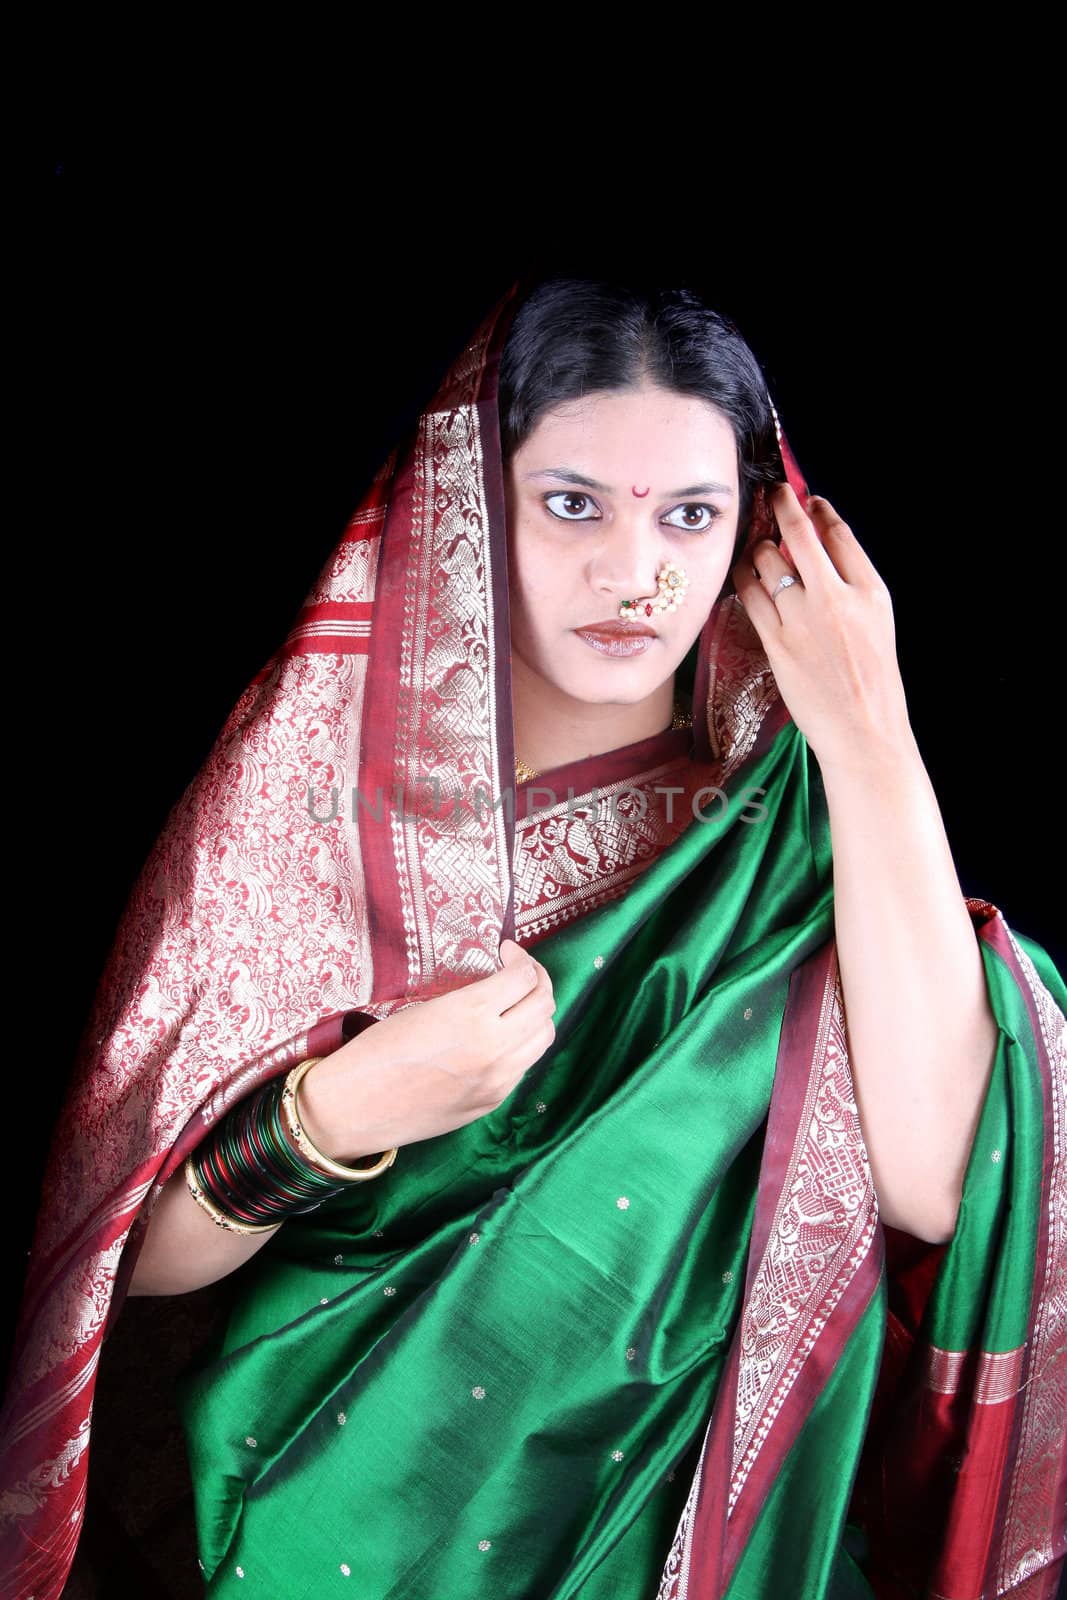 A portrait of a traditional Indian lady expressing anger, on black studio background.